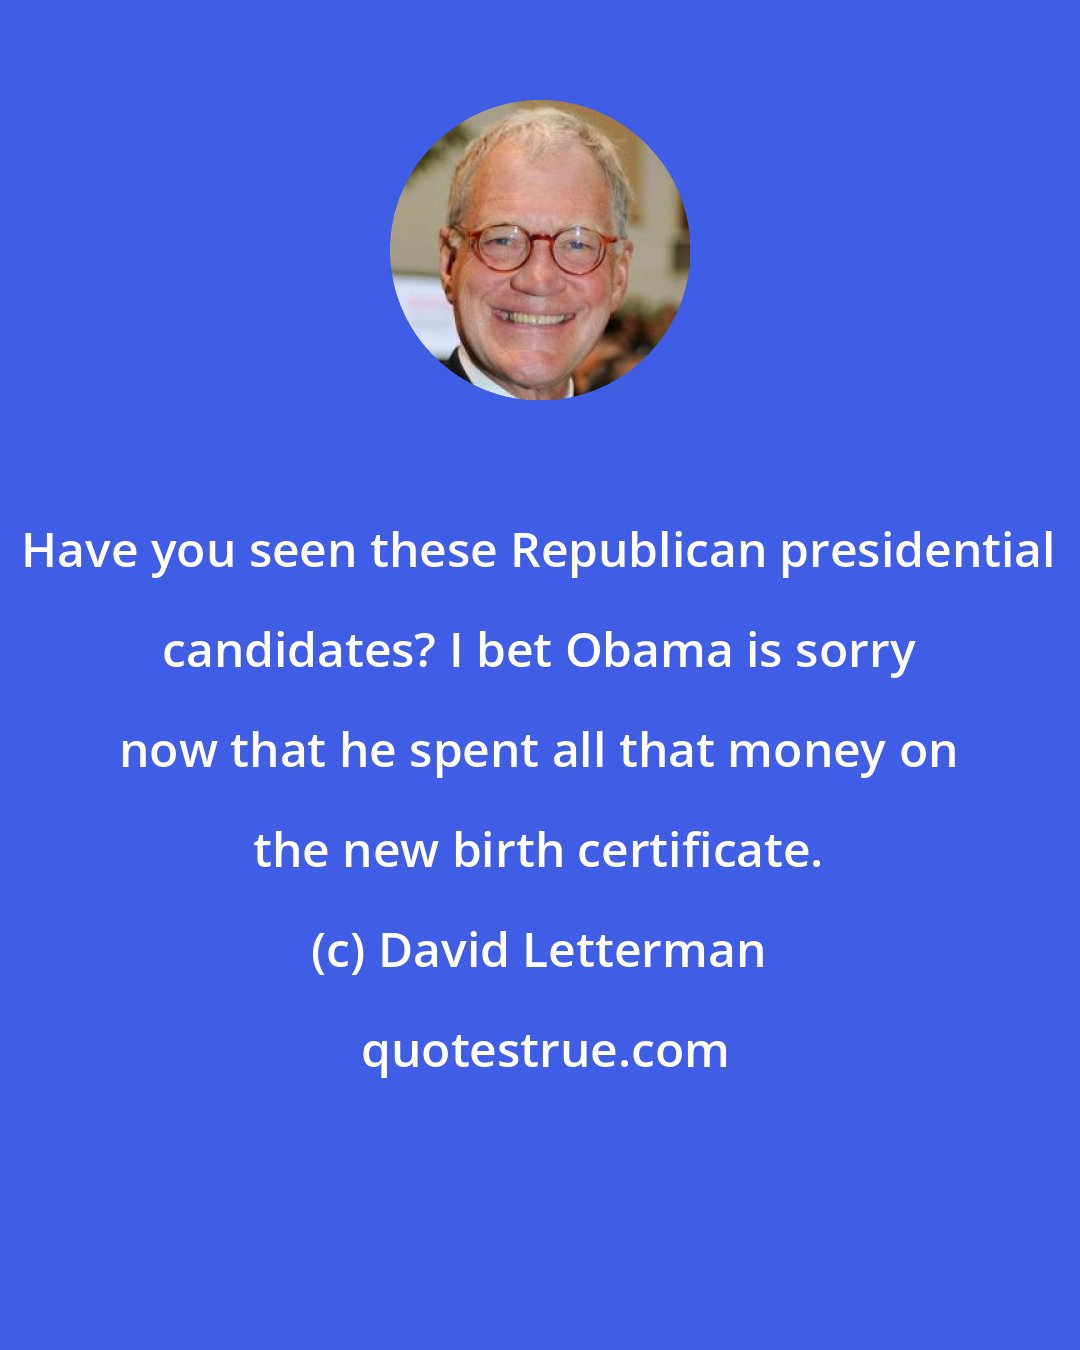 David Letterman: Have you seen these Republican presidential candidates? I bet Obama is sorry now that he spent all that money on the new birth certificate.